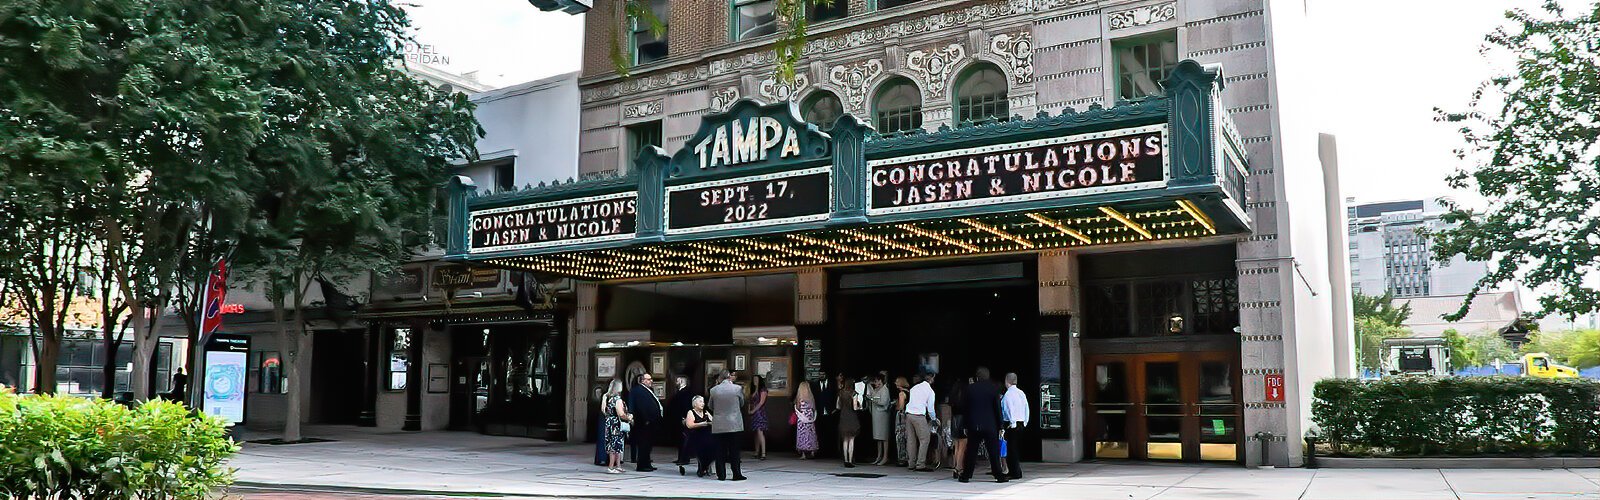 Established in 1926, the historic Tampa Theatre is one of America’s most elaborate movie palaces and a beloved community landmark. It hosts more than 700 events each year, including films, concerts and special events.